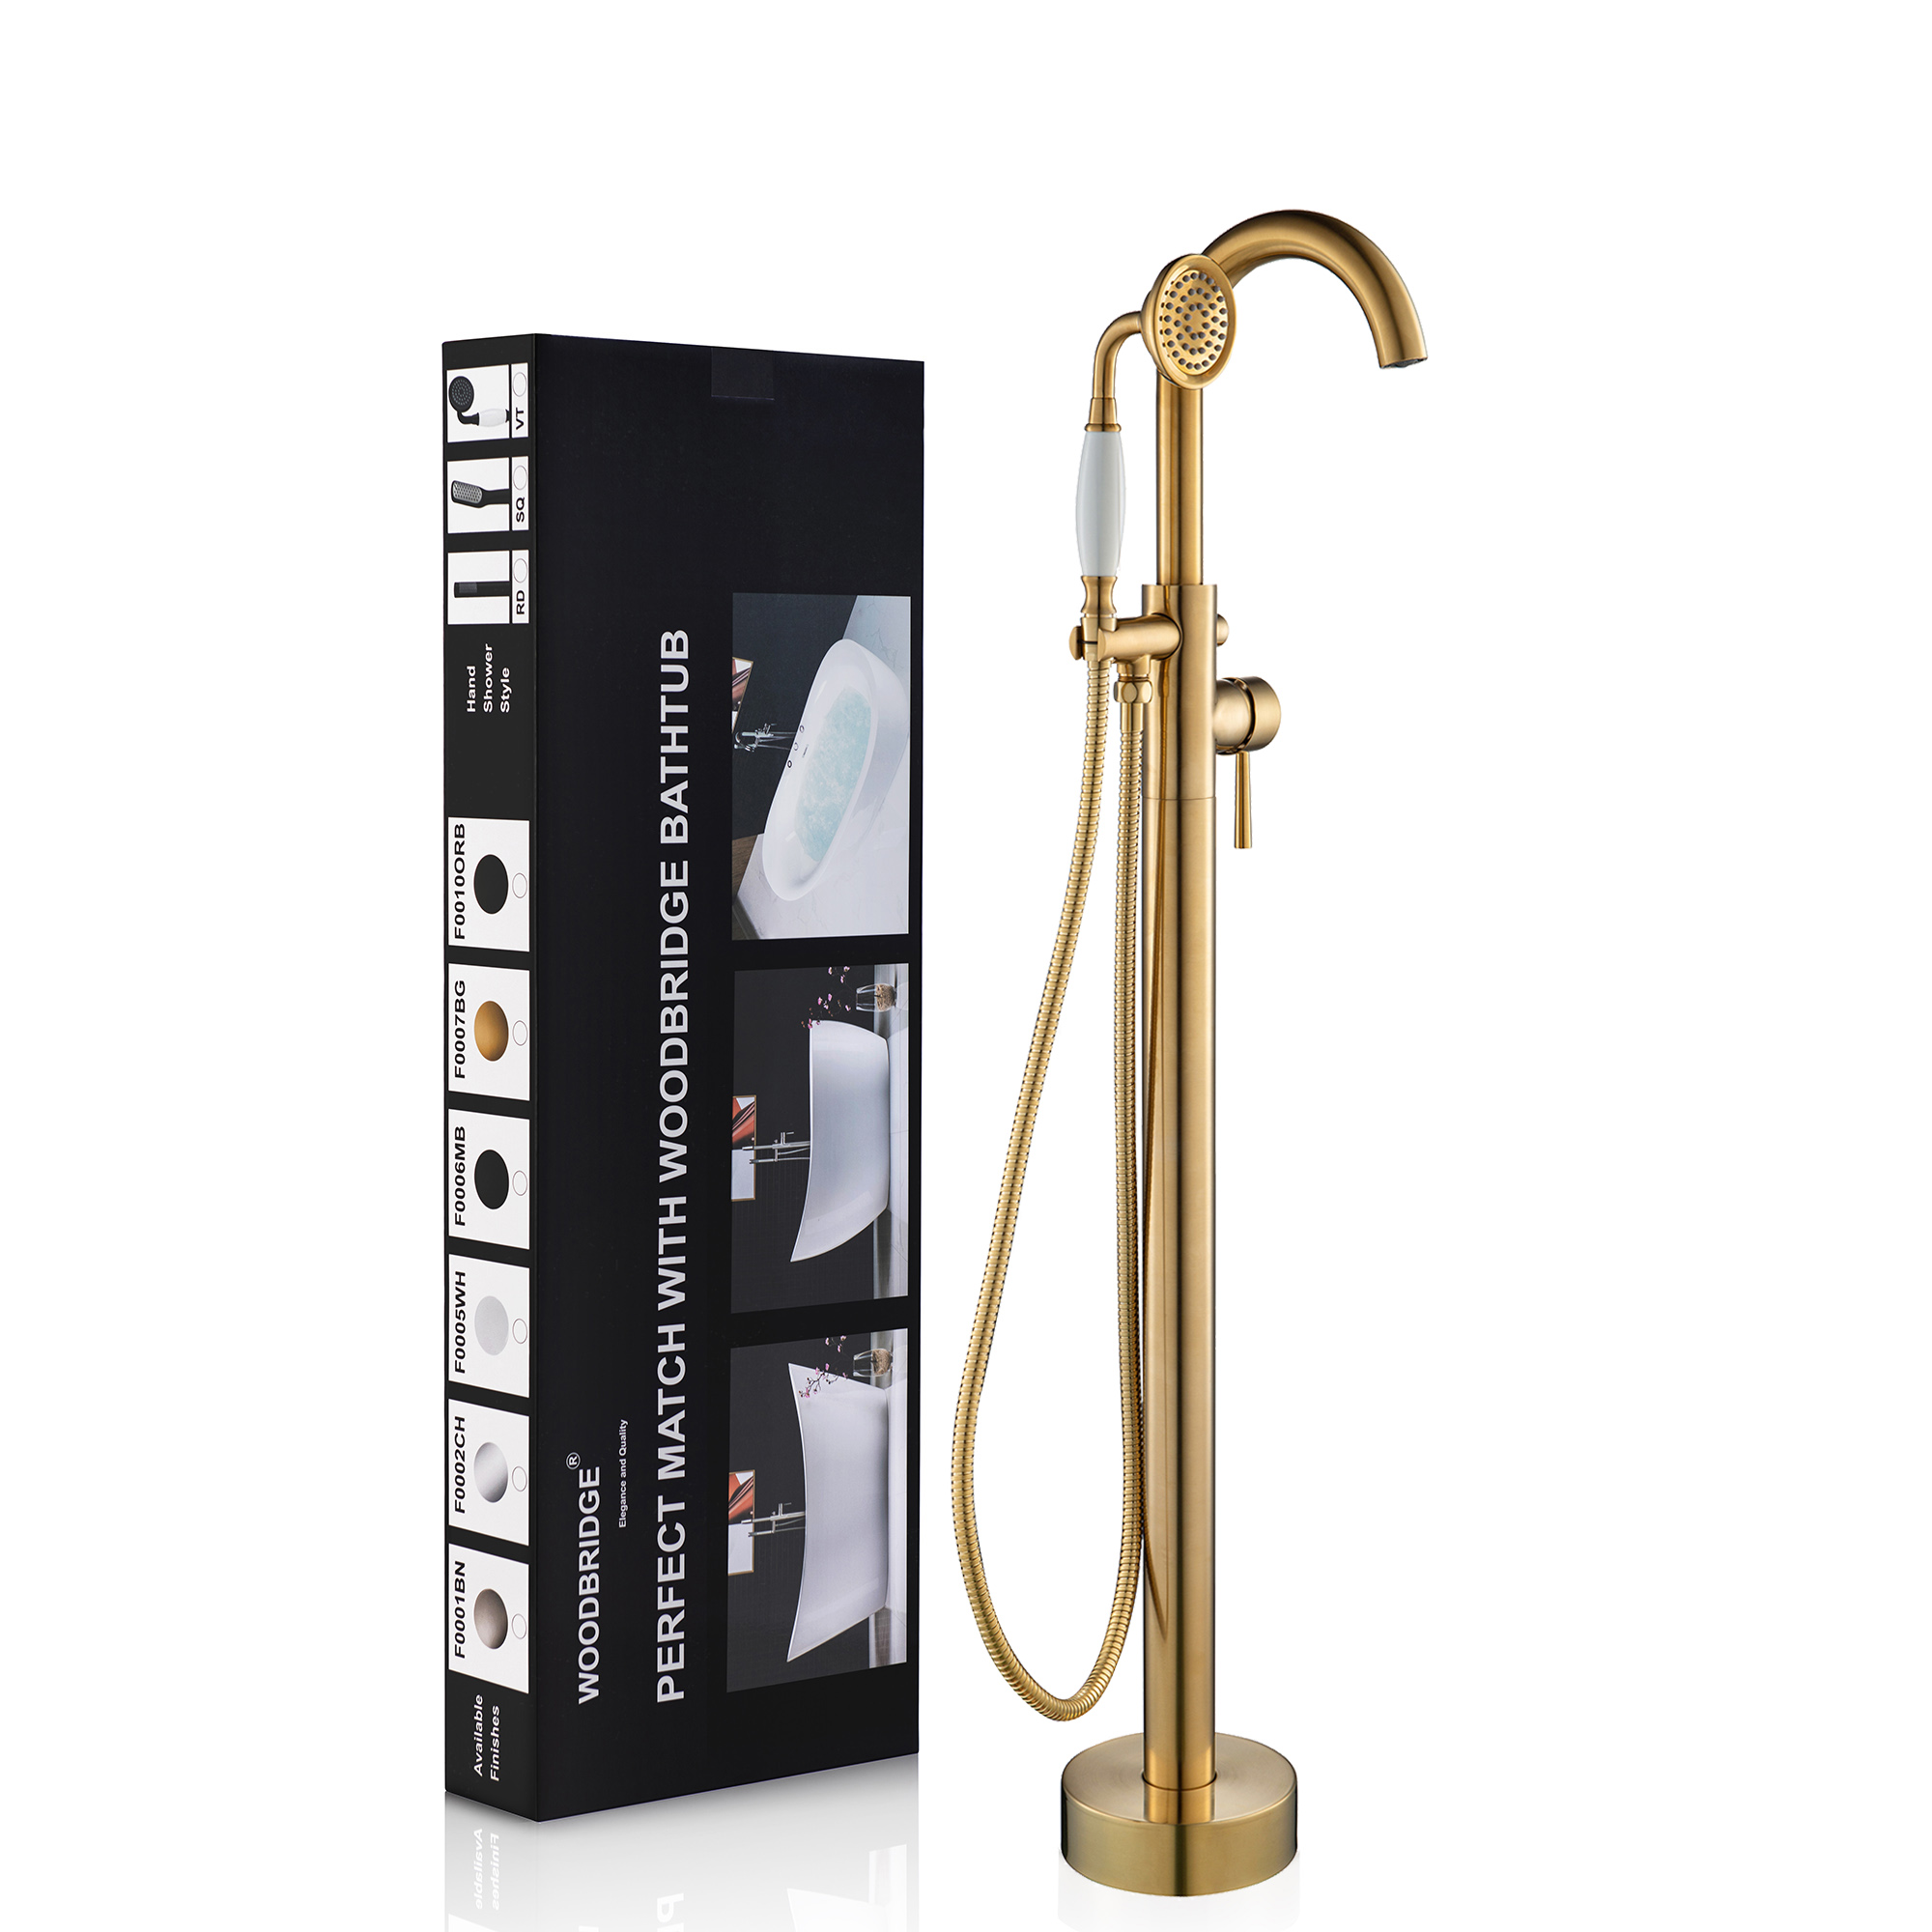  WOODBRIDGE F0007BGVT Fusion Single Handle Floor Mount Freestanding Tub Filler Faucet with Telephone Hand shower in Brushed Gold Finish._11464